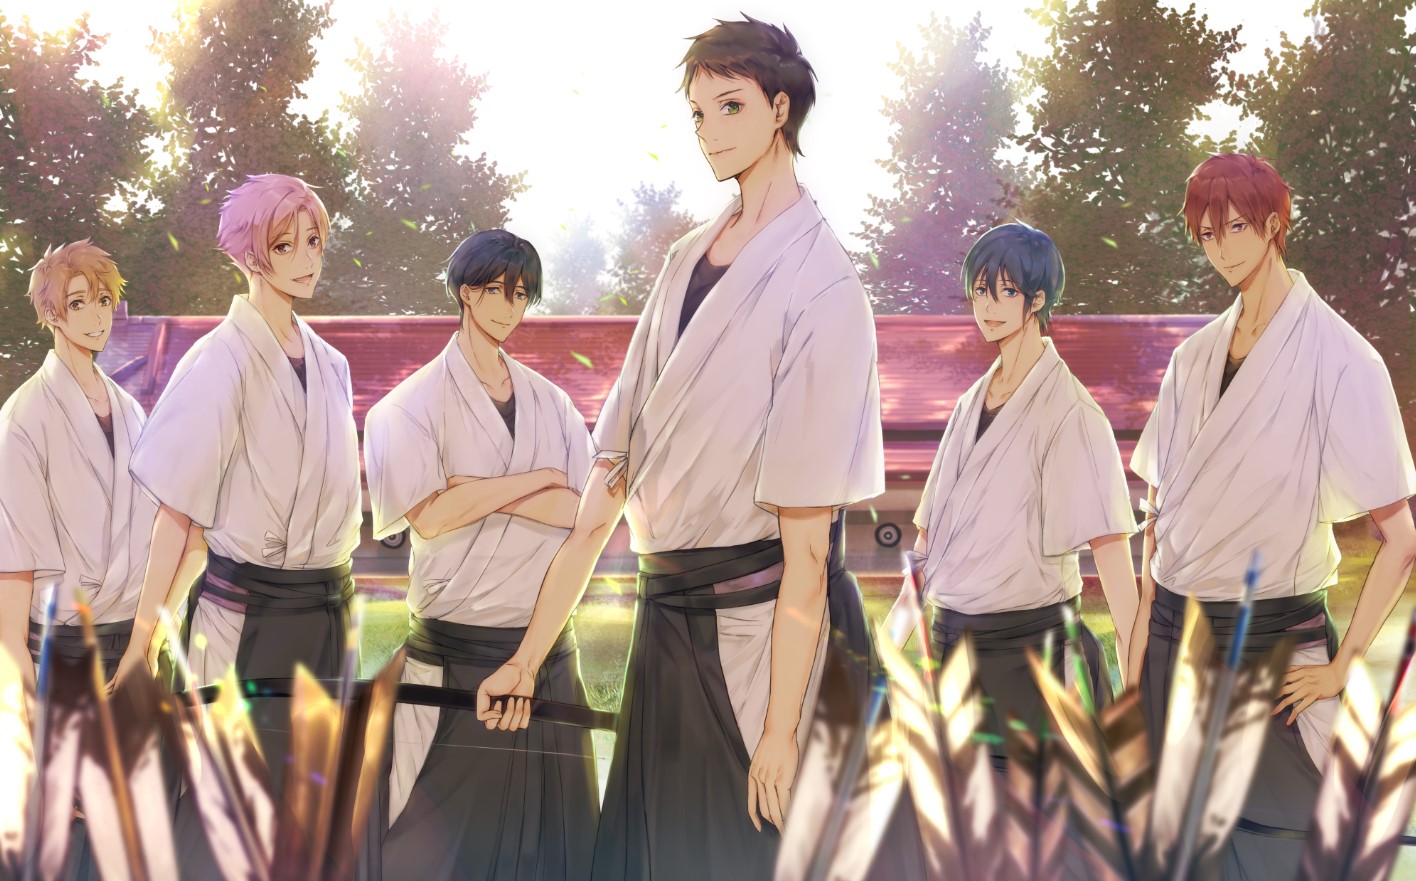 When Will Tsurune Season 2 Going To Be Out? - Venture jolt